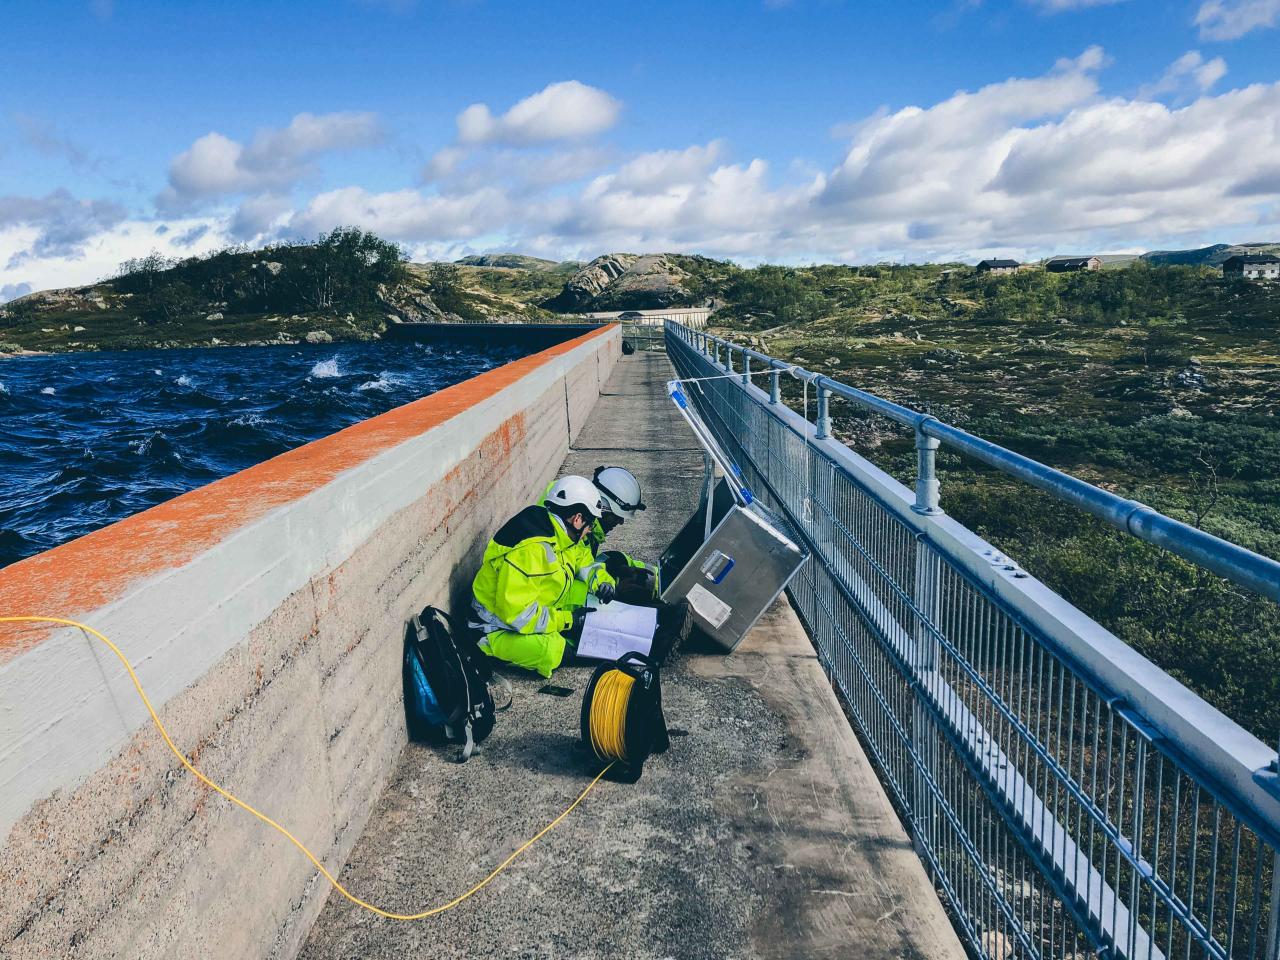 Drone operators at a hydropower location